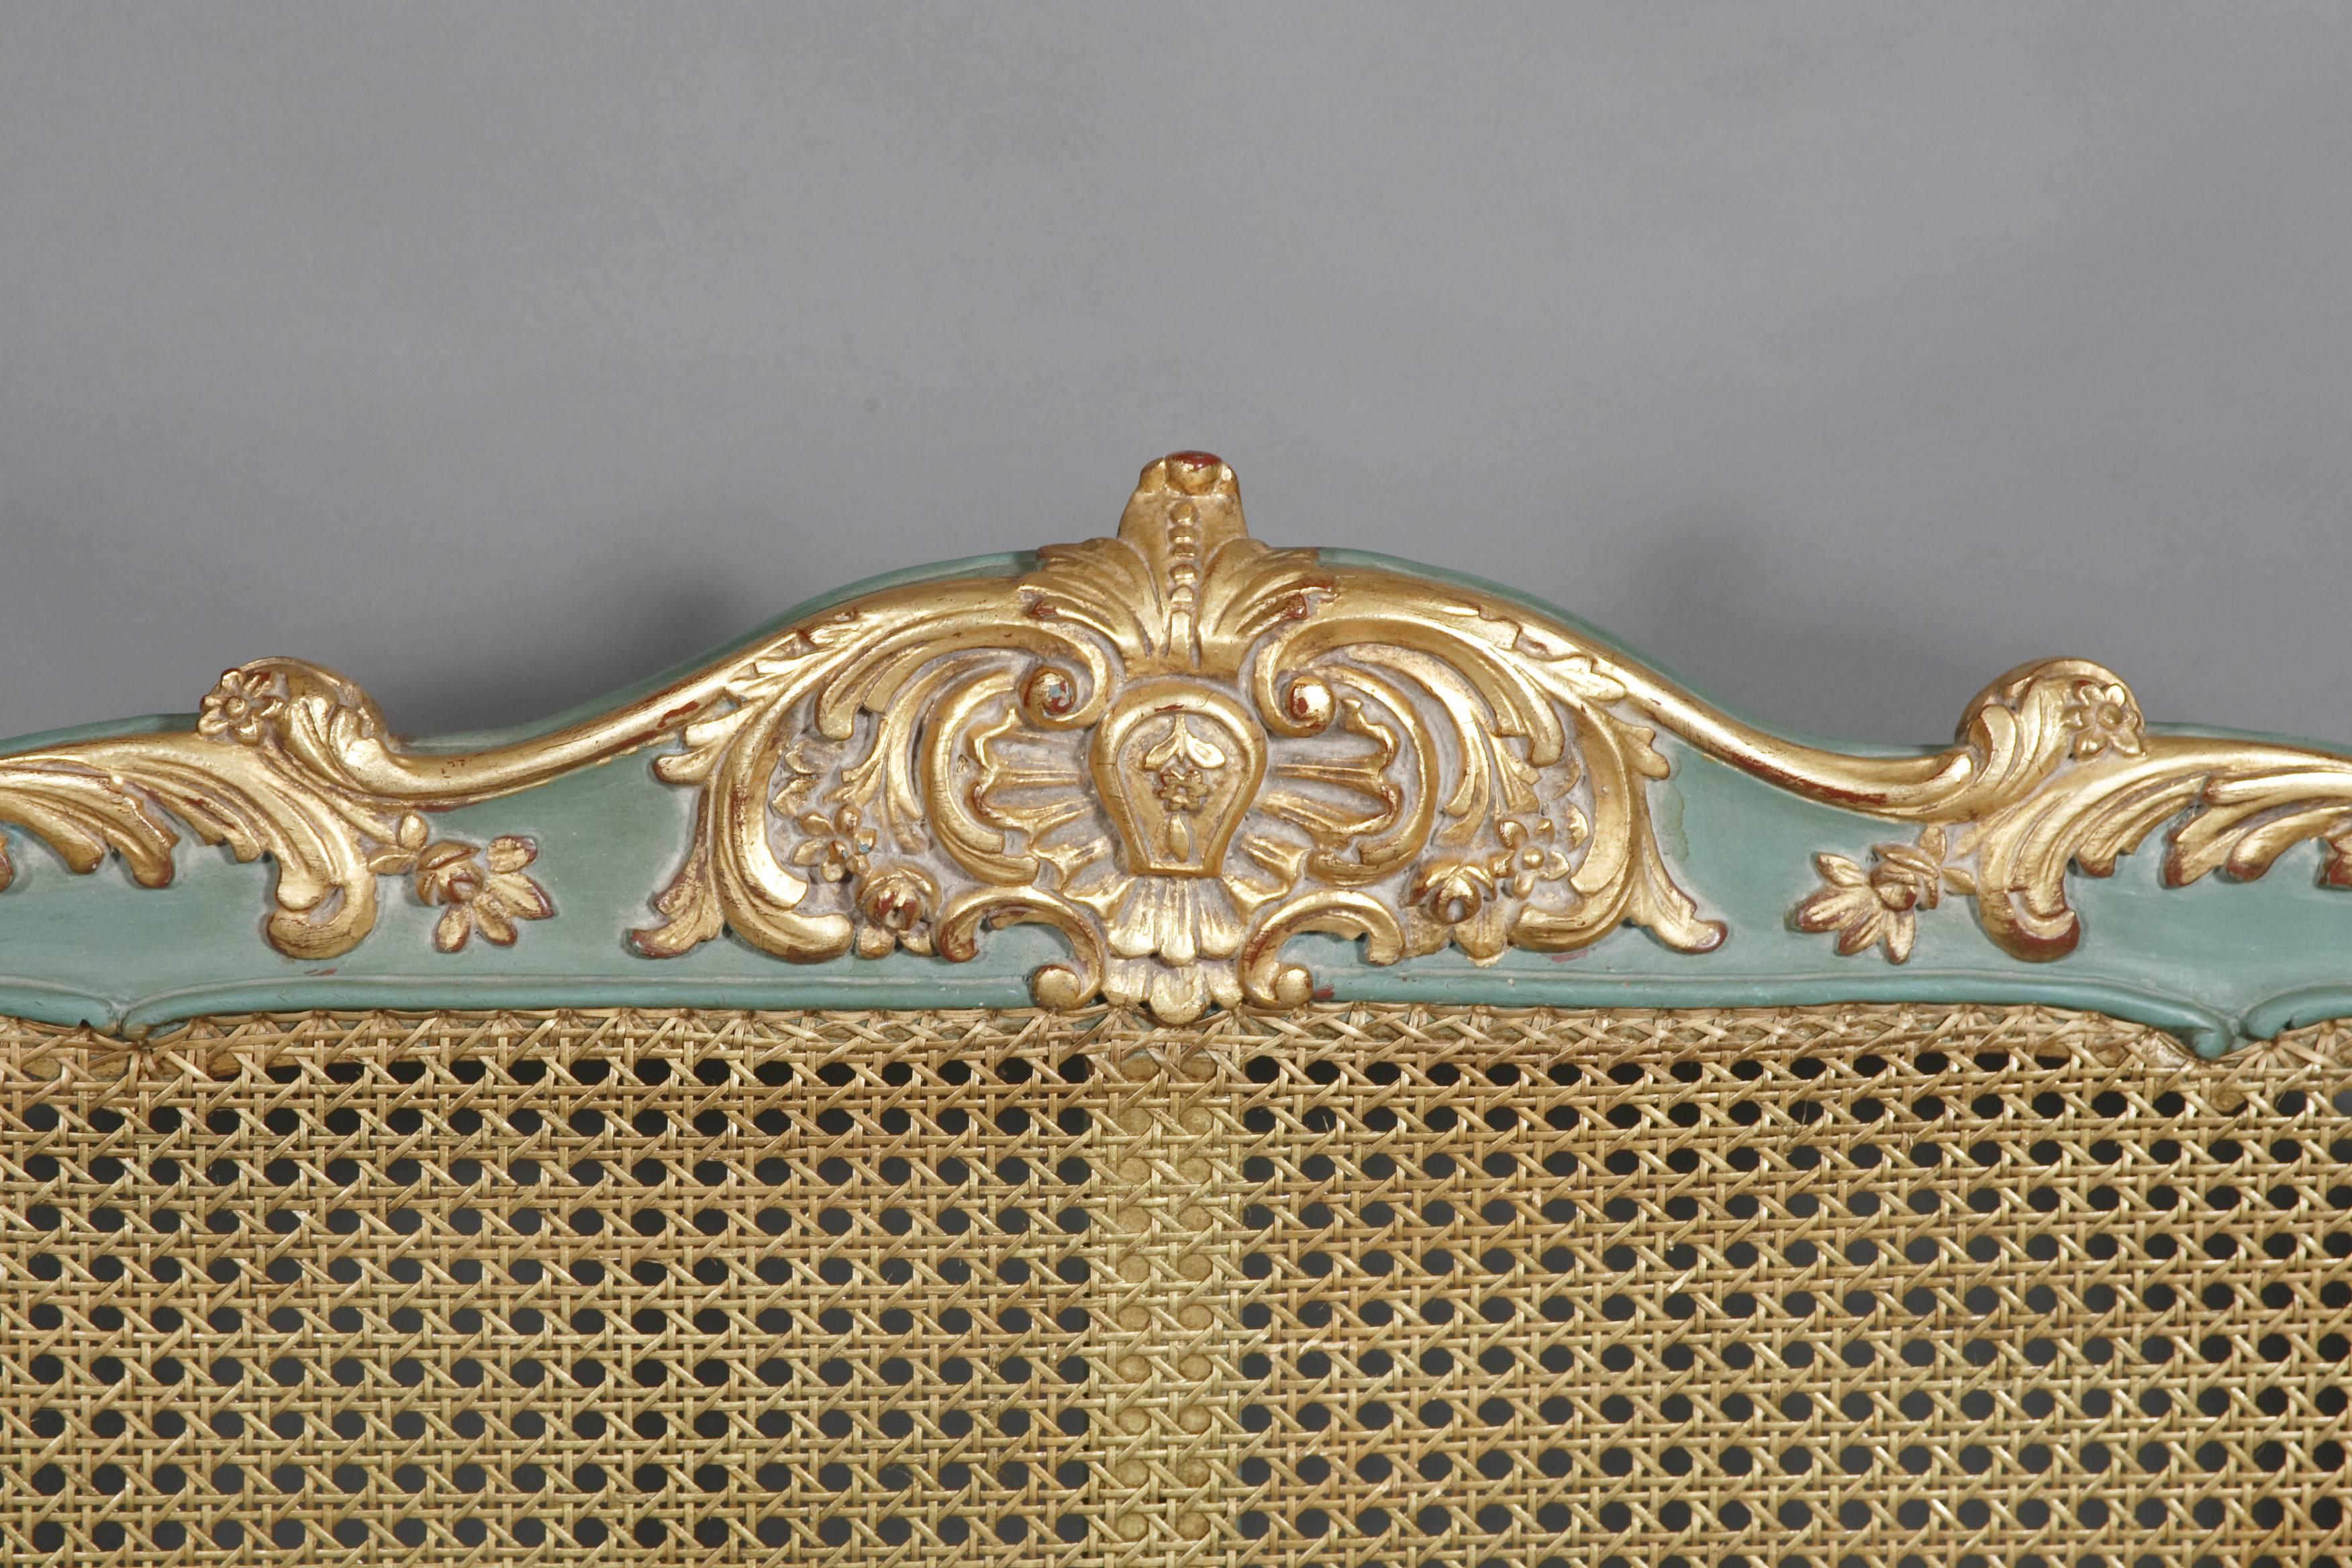 Beech Royal Bed with Wickerwork in the Louis Quinze Style